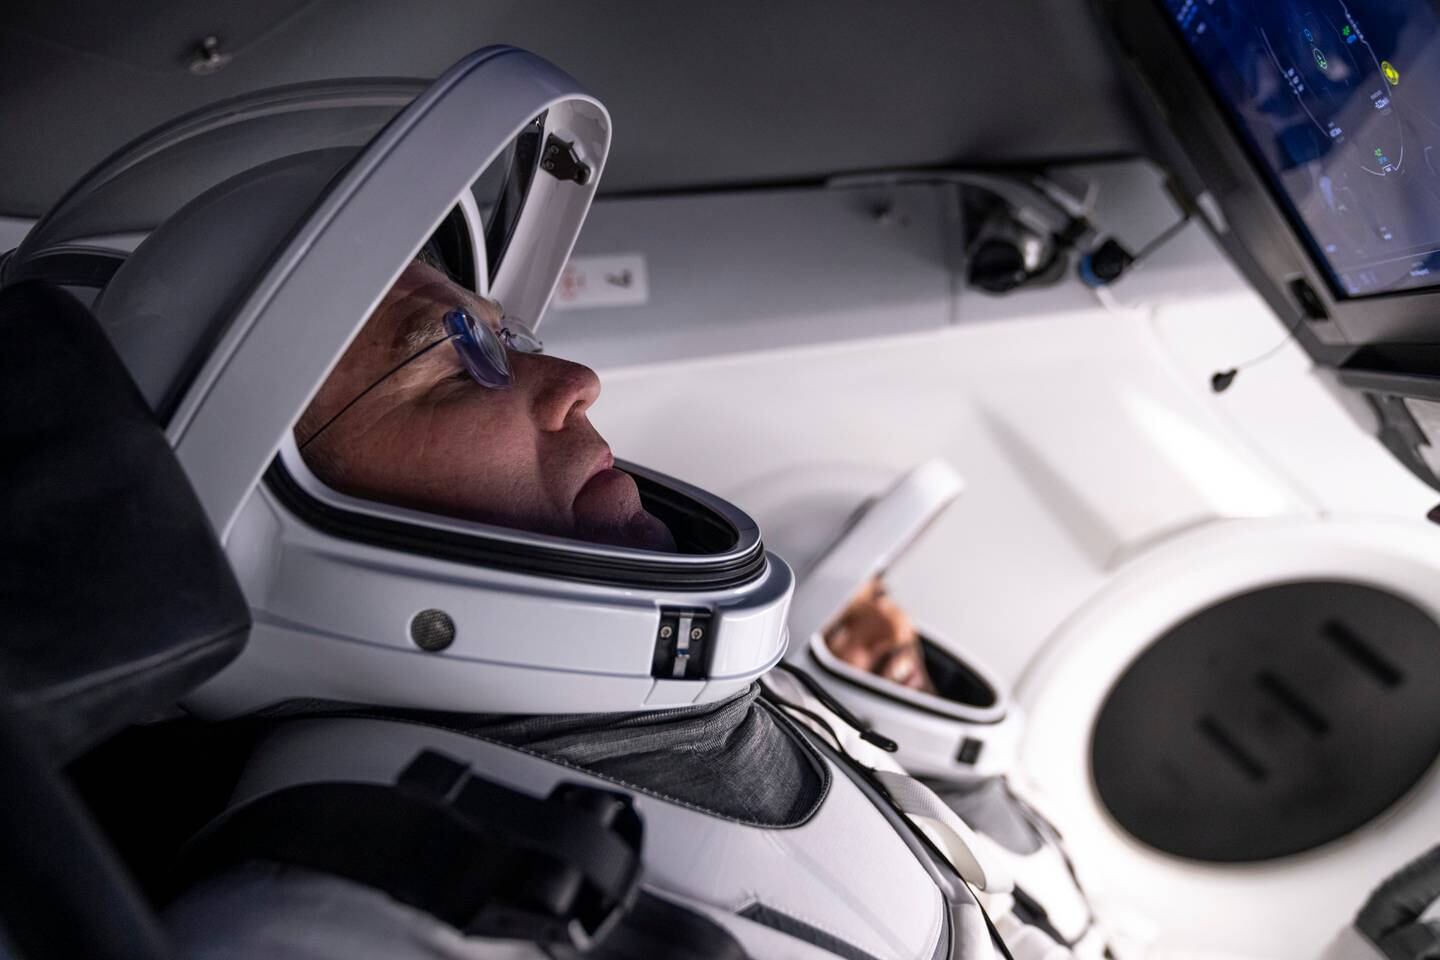 Stephen Bowen inside a Dragon mock-up crew vehicle, taking part in training at the SpaceX base in Hawthorne, California. Photo: SpaceX